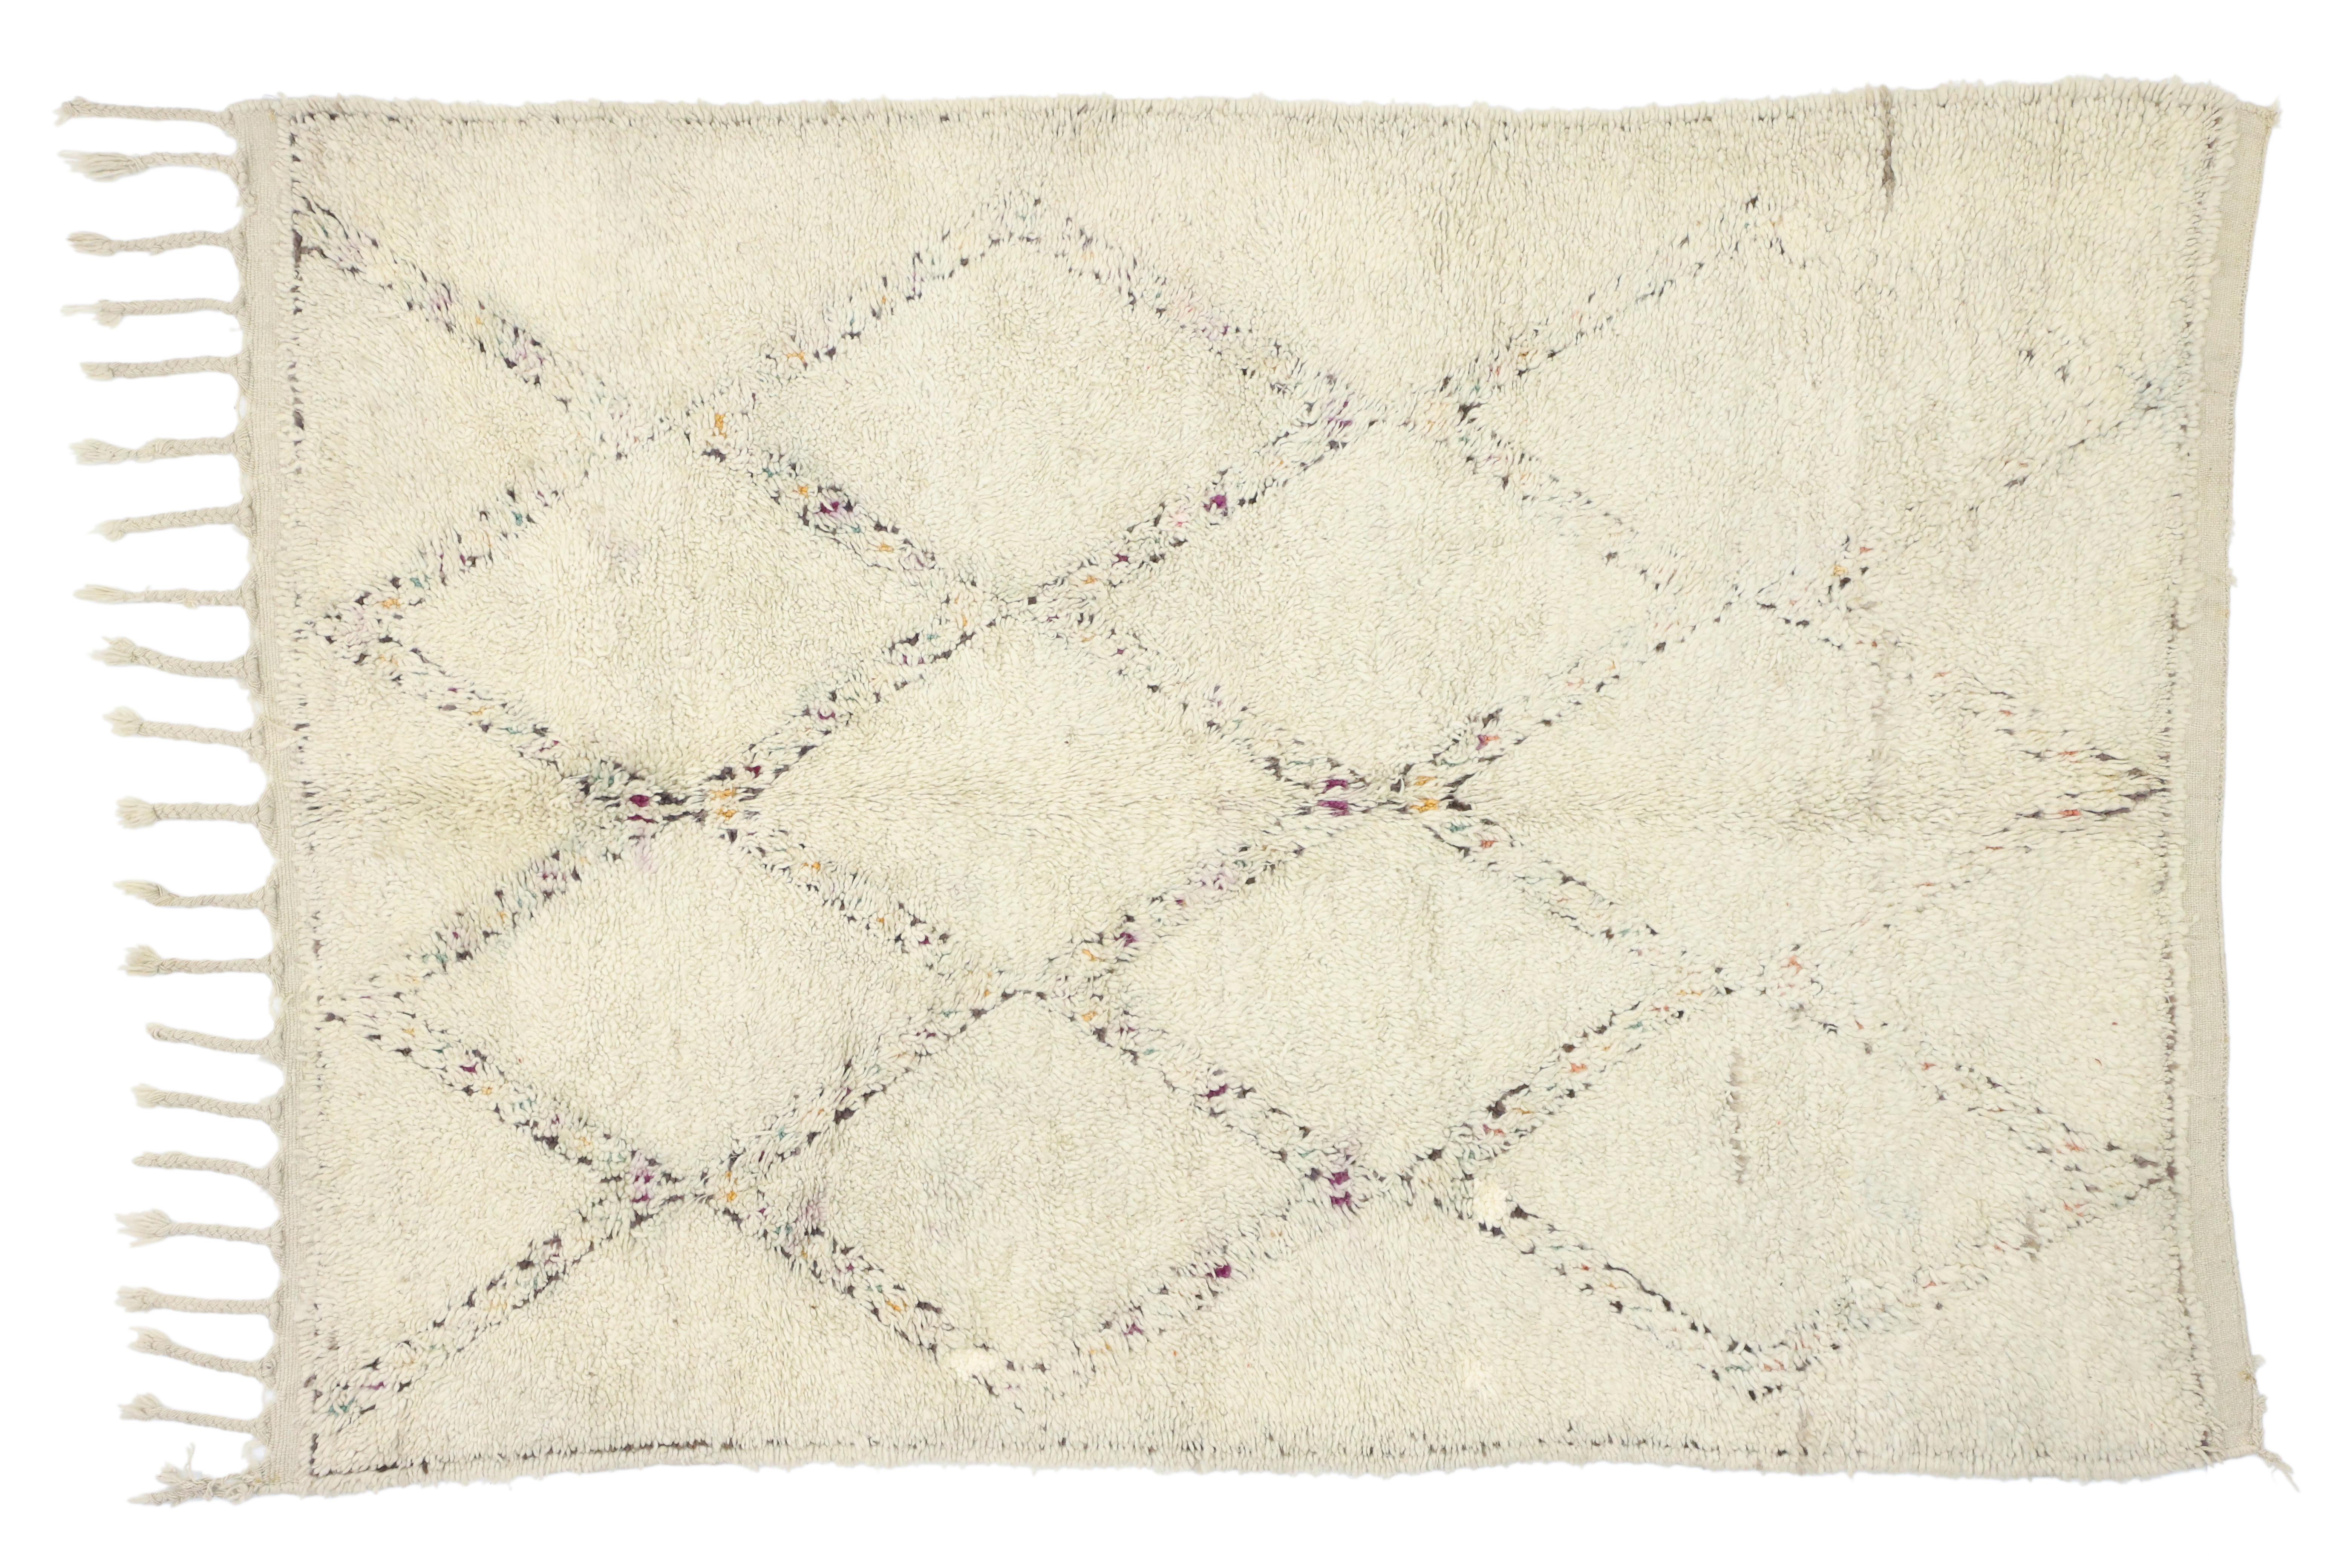 20270 vintage Berber Moroccan rug with Hygge style. This hand knotted wool contemporary Moroccan rug features an all-over diamond lattice pattern spread across an abrashed creamy-beige field. The lattice is comprised of subtle, multicolor dots,